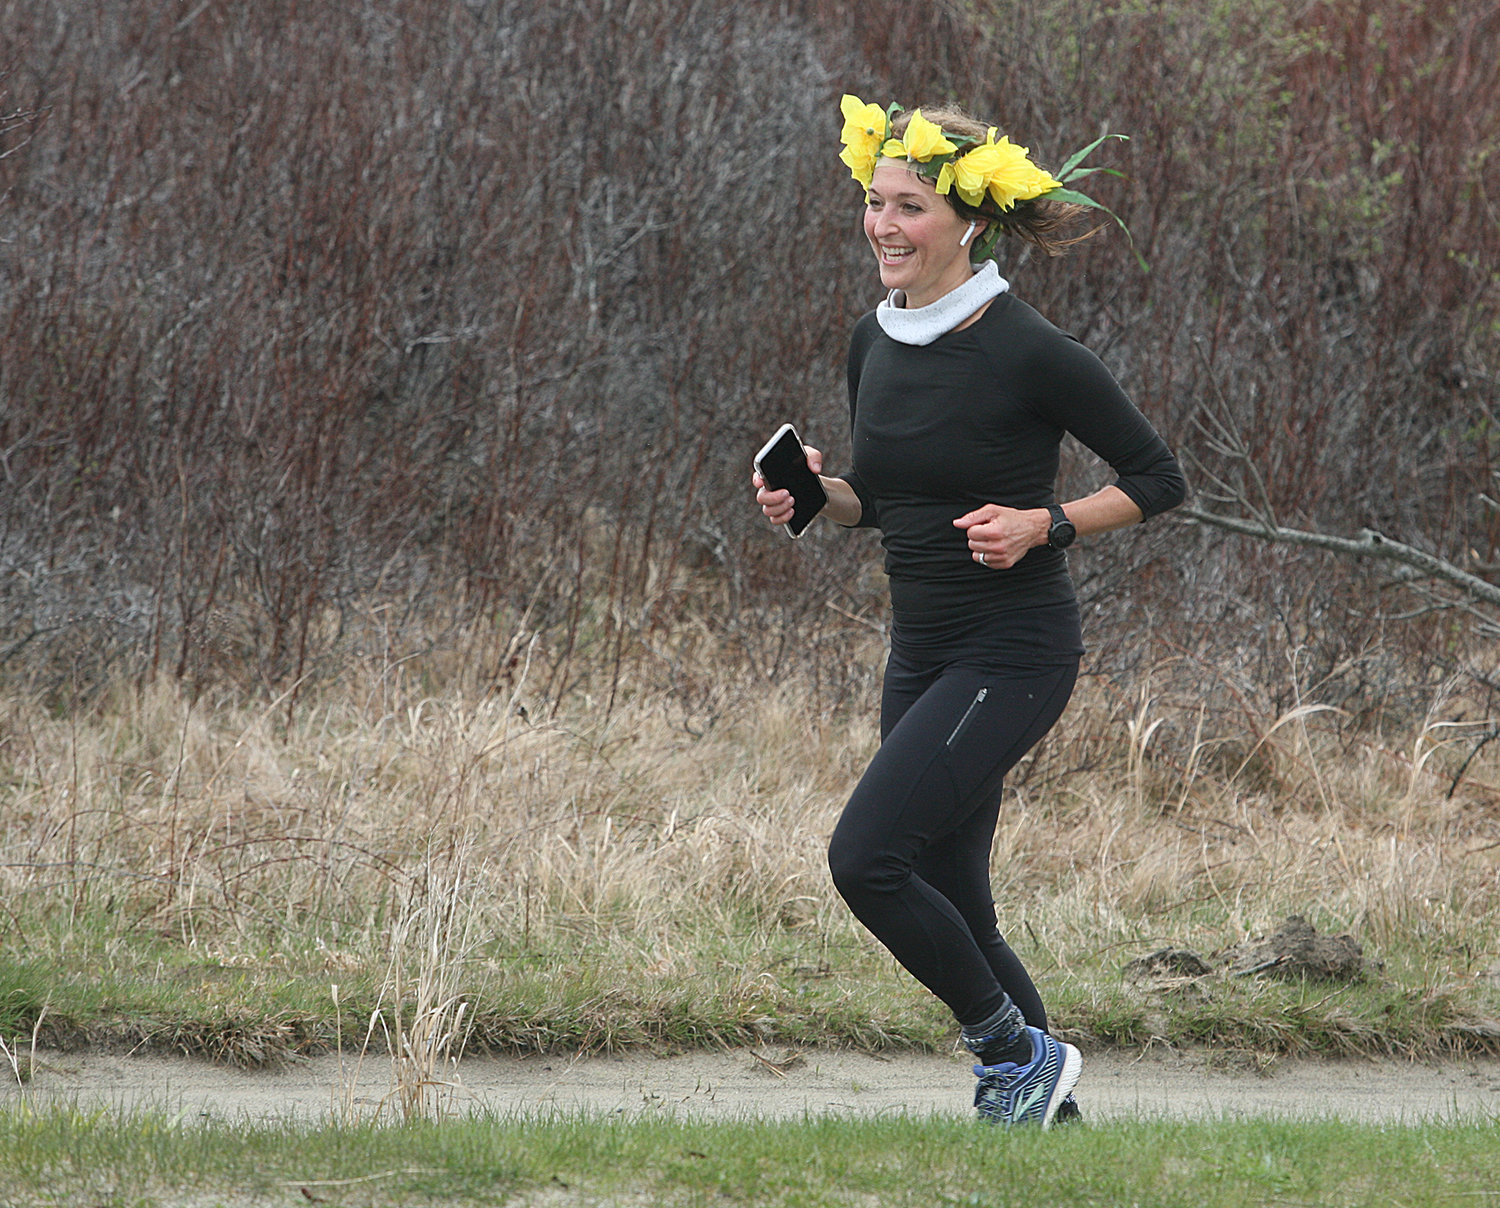 Alexandra Glazier, of Nantucket, is all smiles wearing a daffodil crown as she nears the finish line on the path along Dionis Beach Road on in April. It was Glazier's 50th birthday and she ran a personal 10K trying for her best time. She succeeded.